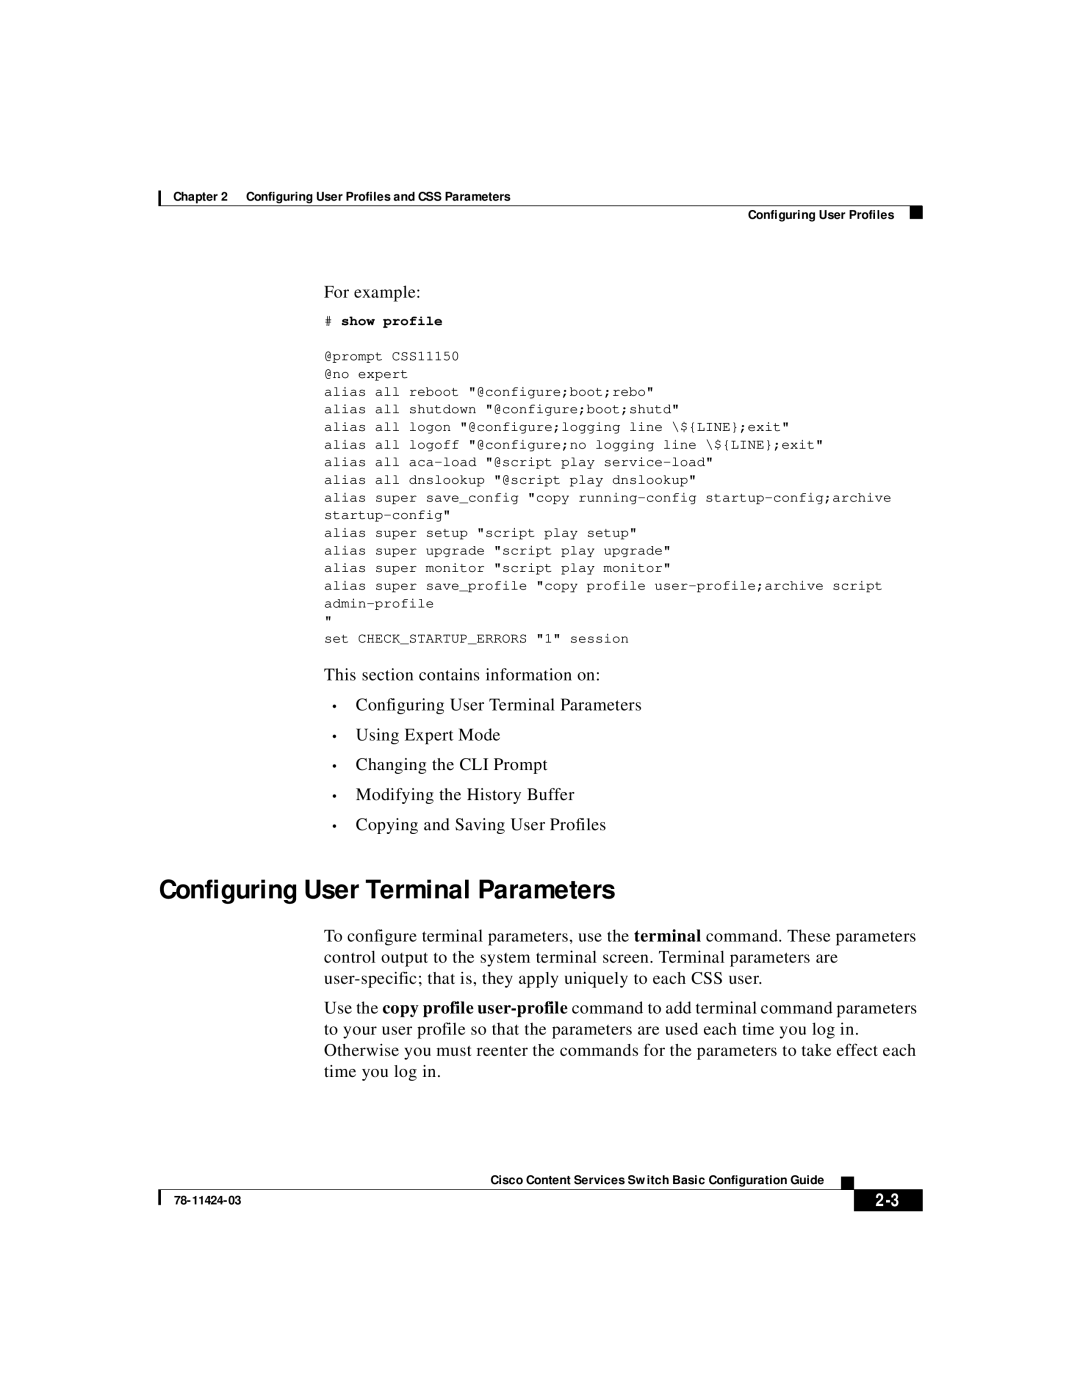 Cisco Systems 78-11424-03 manual Configuring User Terminal Parameters 